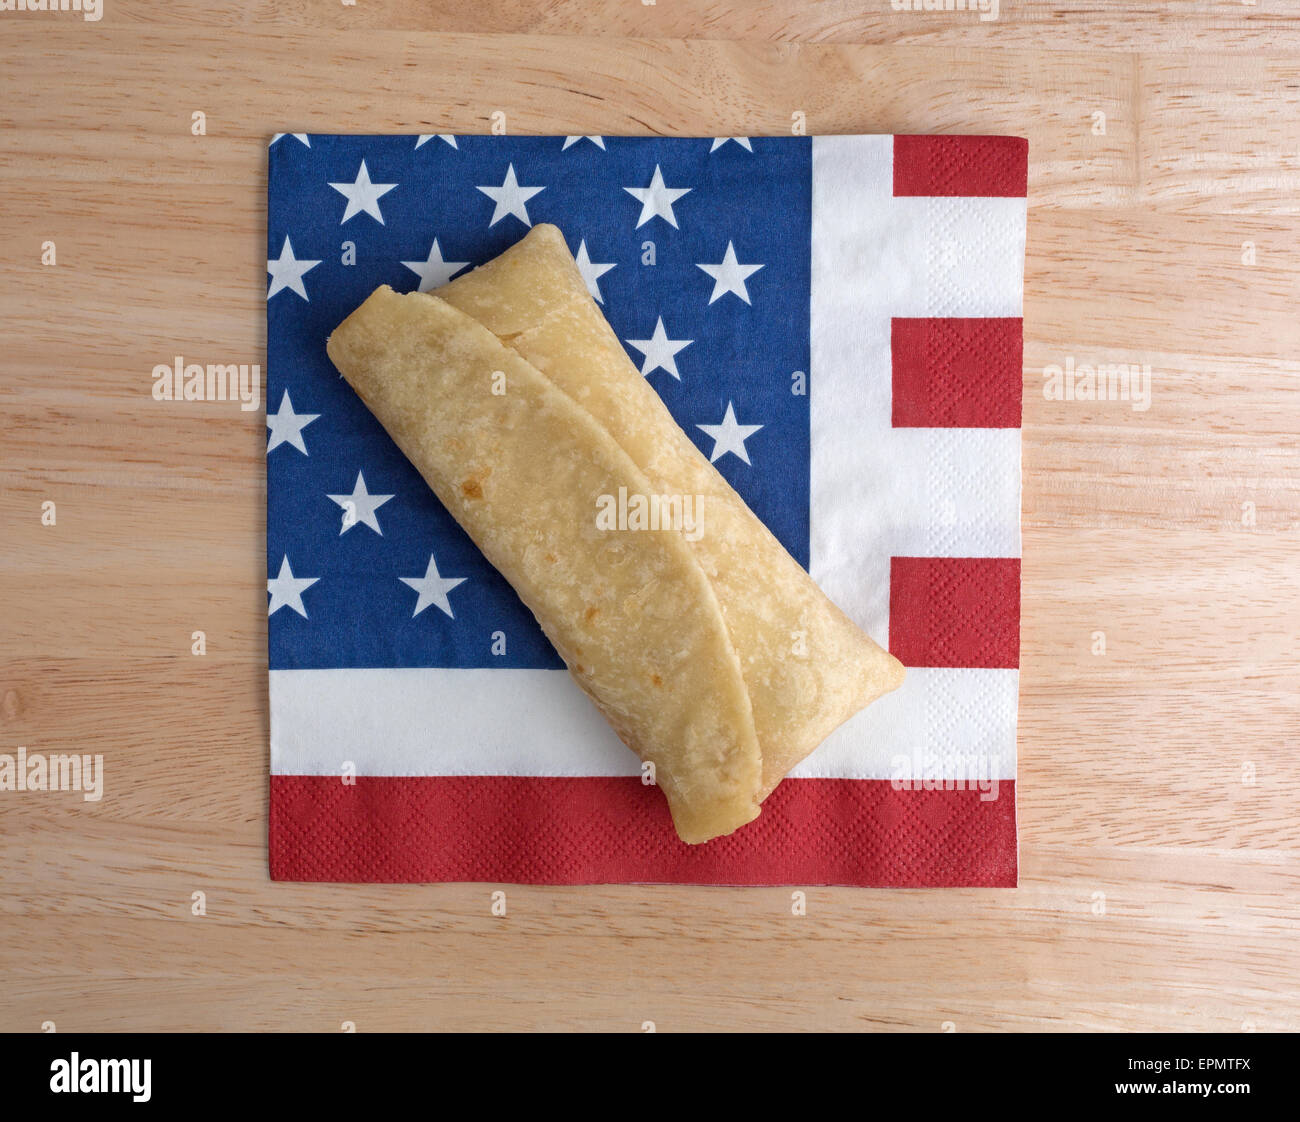 Top view of a microwaved chimichanga on an American flag motif napkin atop a wood table top. Stock Photo